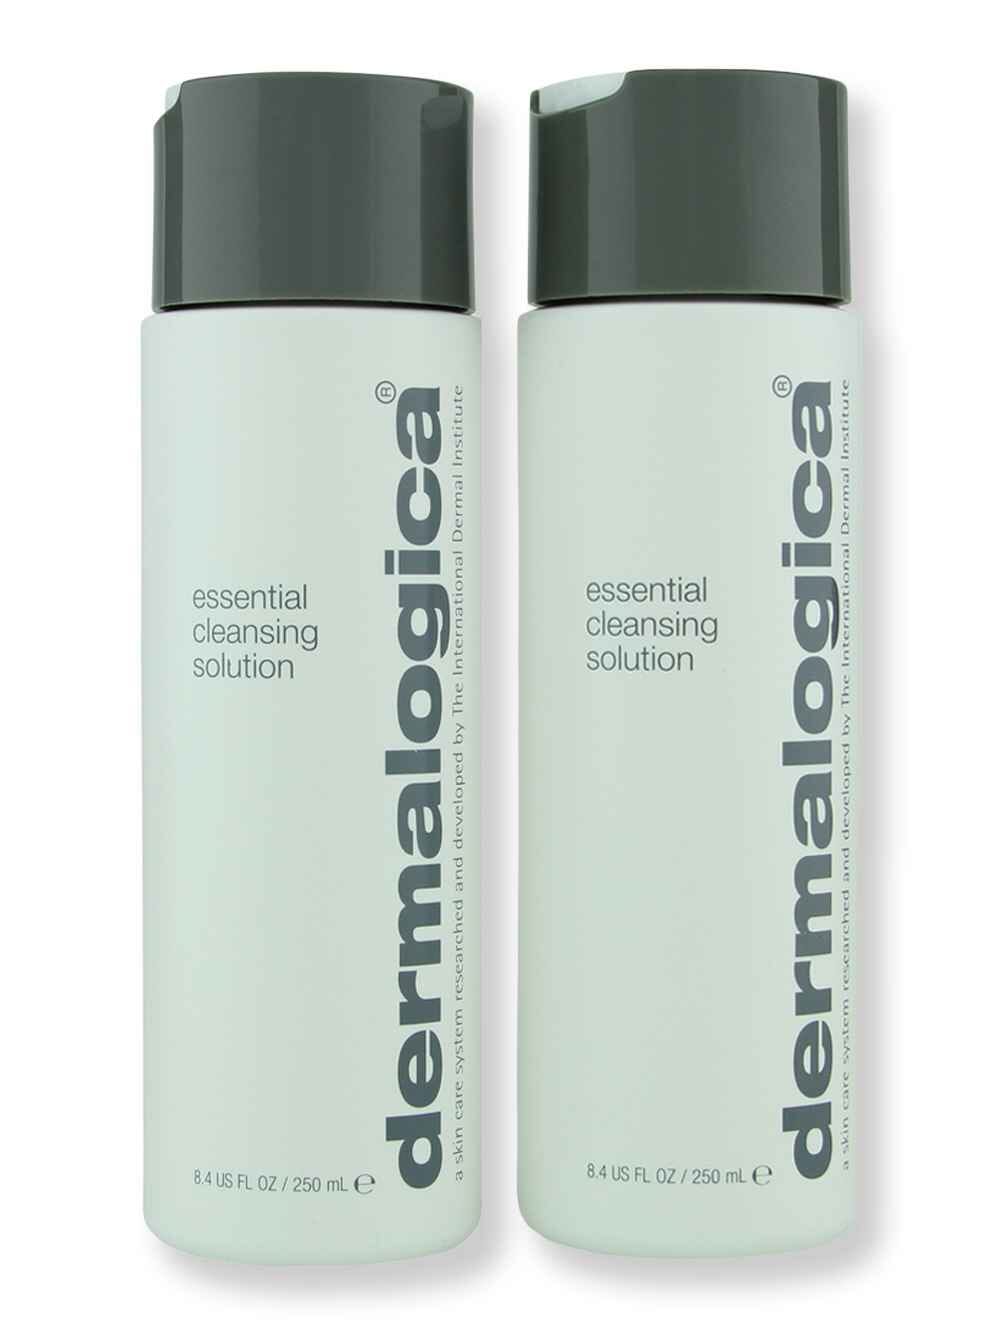 Dermalogica Dermalogica Essential Cleansing Solution 8.4 oz 2 ct Face Cleansers 